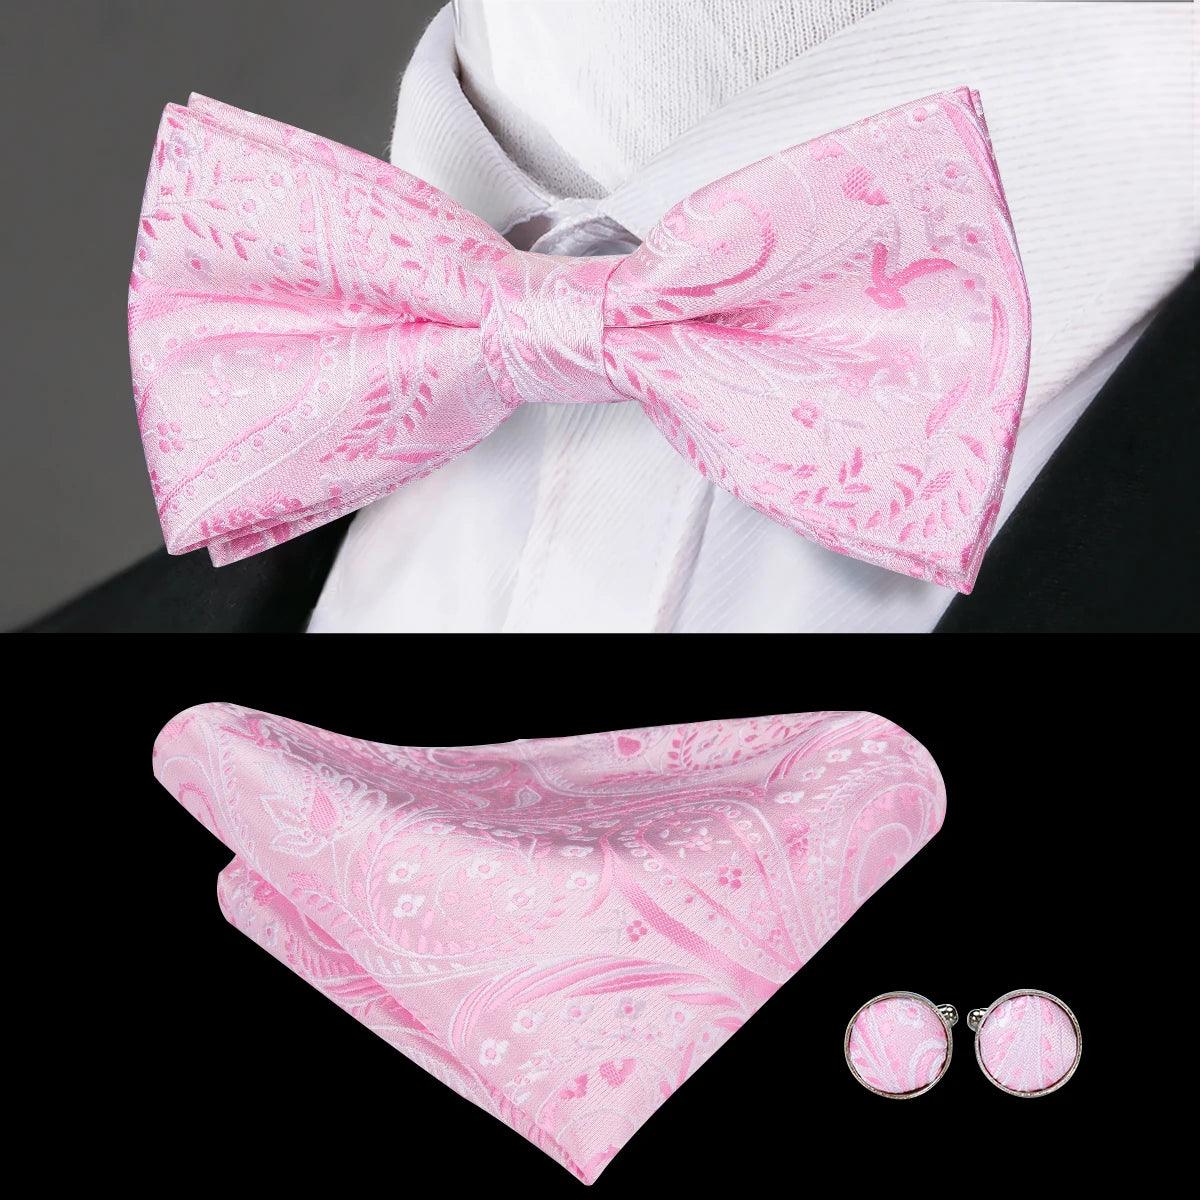 Men's Accessories - Ties Classic Bow Ties For Men Silk Butterfly Pre-Tied Bowtie Pocket Square Cufflink Sets